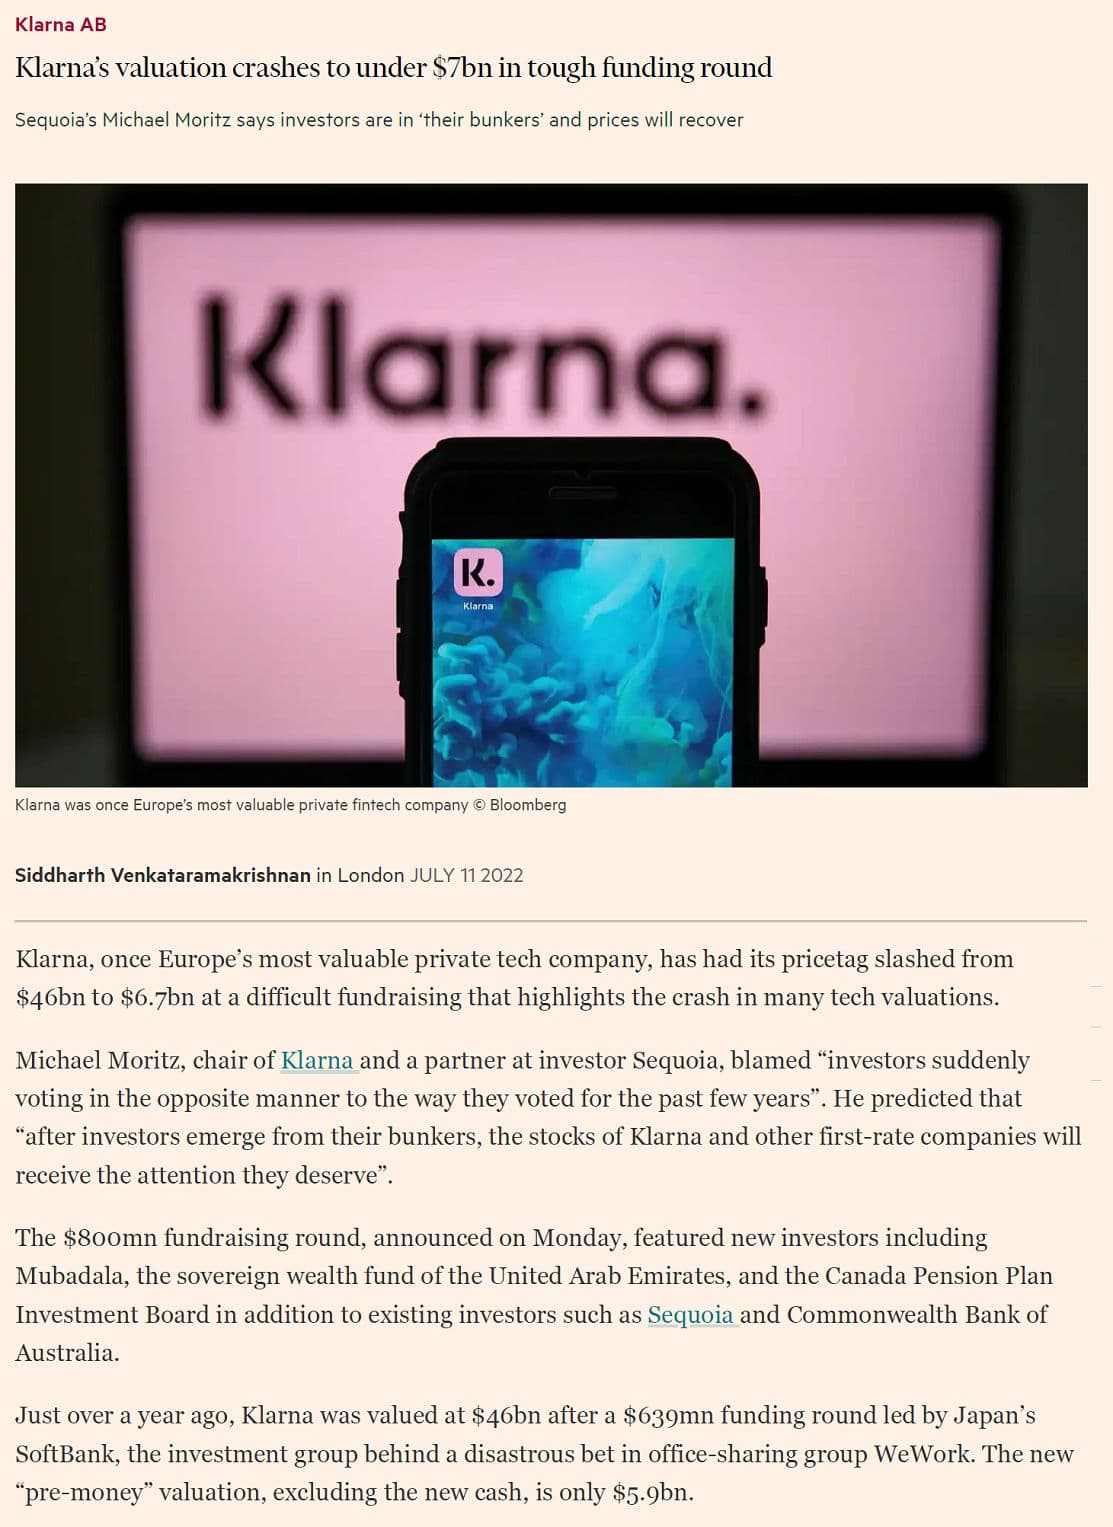 Klarna AB
Klarna's valuation crashes to under $7bn in tough funding round
Sequoia's Michael Moritz says investors are in their bunkers' and prices will recover
Klarna.
K.
Klarna
Klarna was once Europe's most valuable private fintech company © Bloomberg
Siddharth Venkataramakrishnan in London JULY 11 2022
Klarna, once Europe's most valuable private tech company, has had its pricetag slashed from
$46bn to $6.7bn at a difficult fundraising that highlights the crash in many tech valuations.
Michael Moritz, chair of Klarna and a partner at investor Sequoia, blamed "investors suddenly
voting in the opposite manner to the way they voted for the past few years". He predicted that
"after investors emerge from their bunkers, the stocks of Klarna and other first-rate companies will
receive the attention they deserve”.
The $800mn fundraising round, announced on Monday, featured new investors including
Mubadala, the sovereign wealth fund of the United Arab Emirates, and the Canada Pension Plan
Investment Board in addition to existing investors such as Sequoia and Commonwealth Bank of
Australia.
Just over a year ago, Klarna was valued at $46bn after a $639mn funding round led by Japan's
SoftBank, the investment group behind a disastrous bet in office-sharing group WeWork. The new
"pre-money" valuation, excluding the new cash, is only $5.9bn.